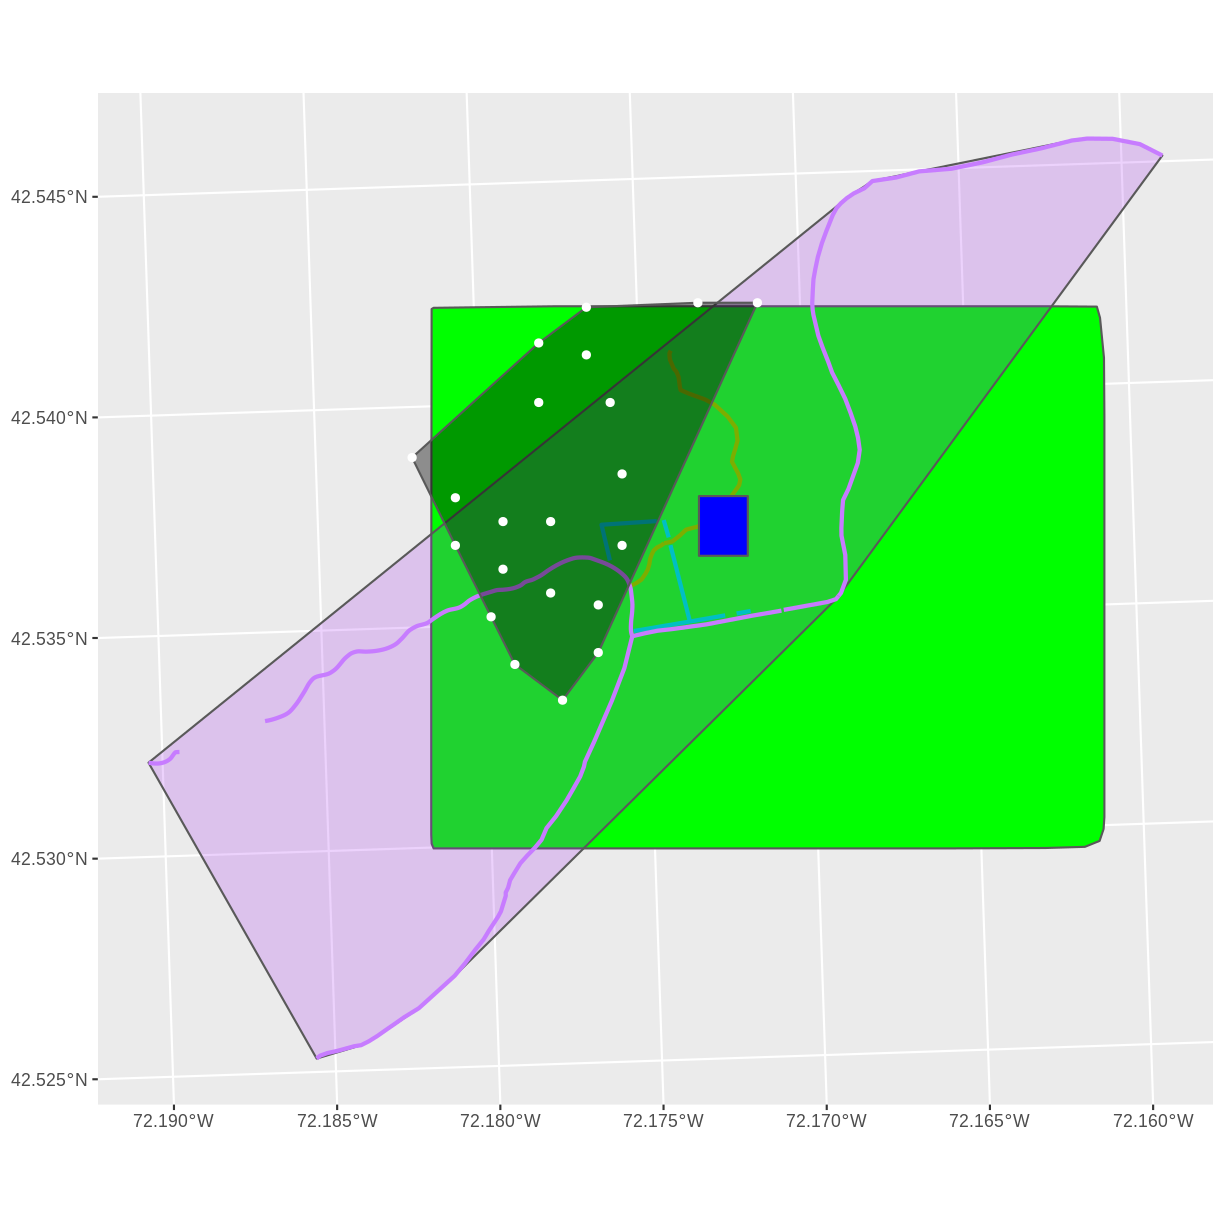 plot of chunk repeat-compare-data-extents